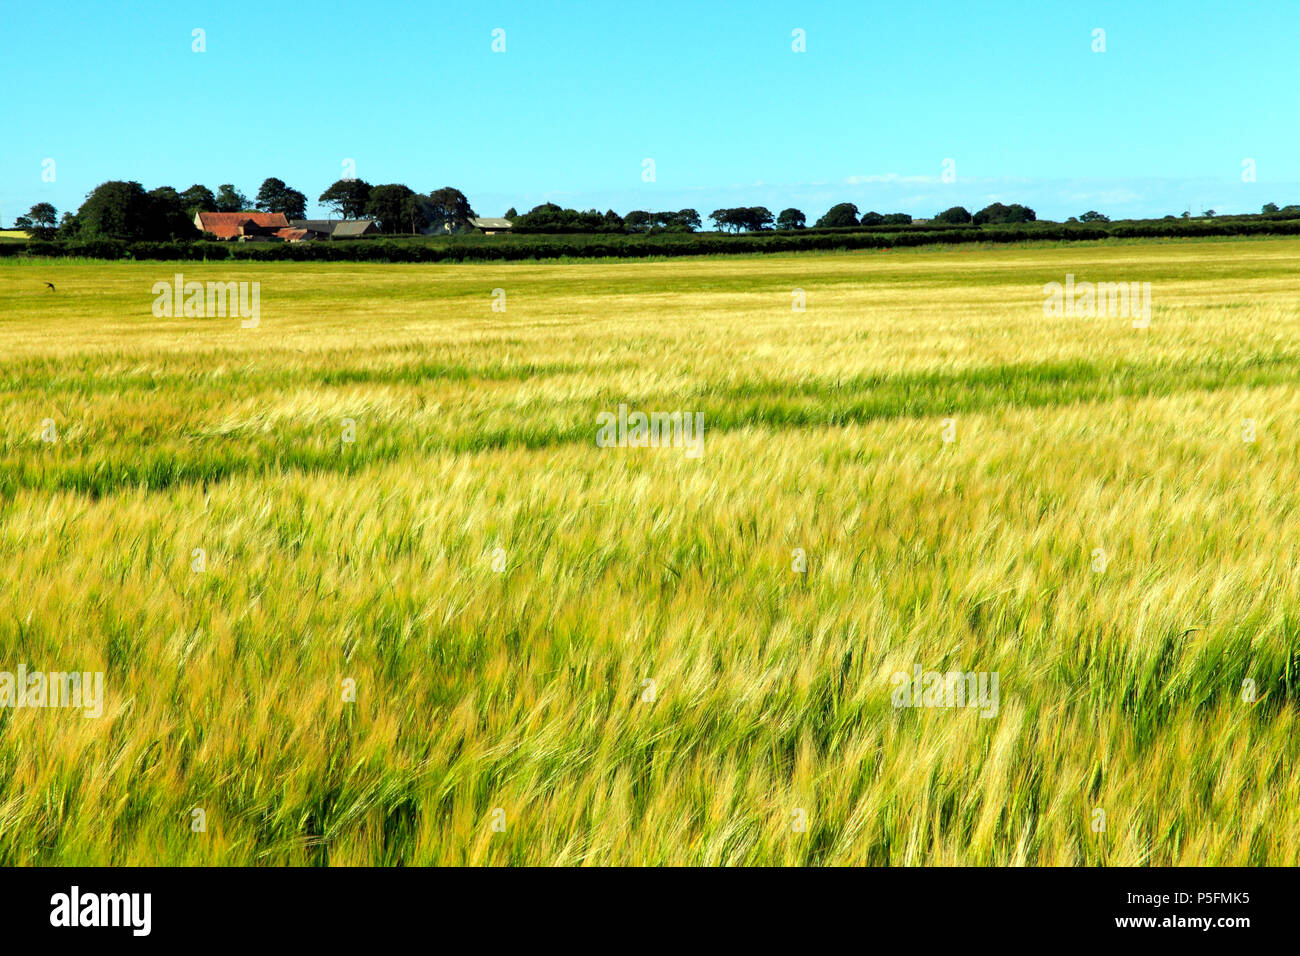 Barley, in fields, yellow, agricultural field, crop, Norfolk, England, UK Stock Photo